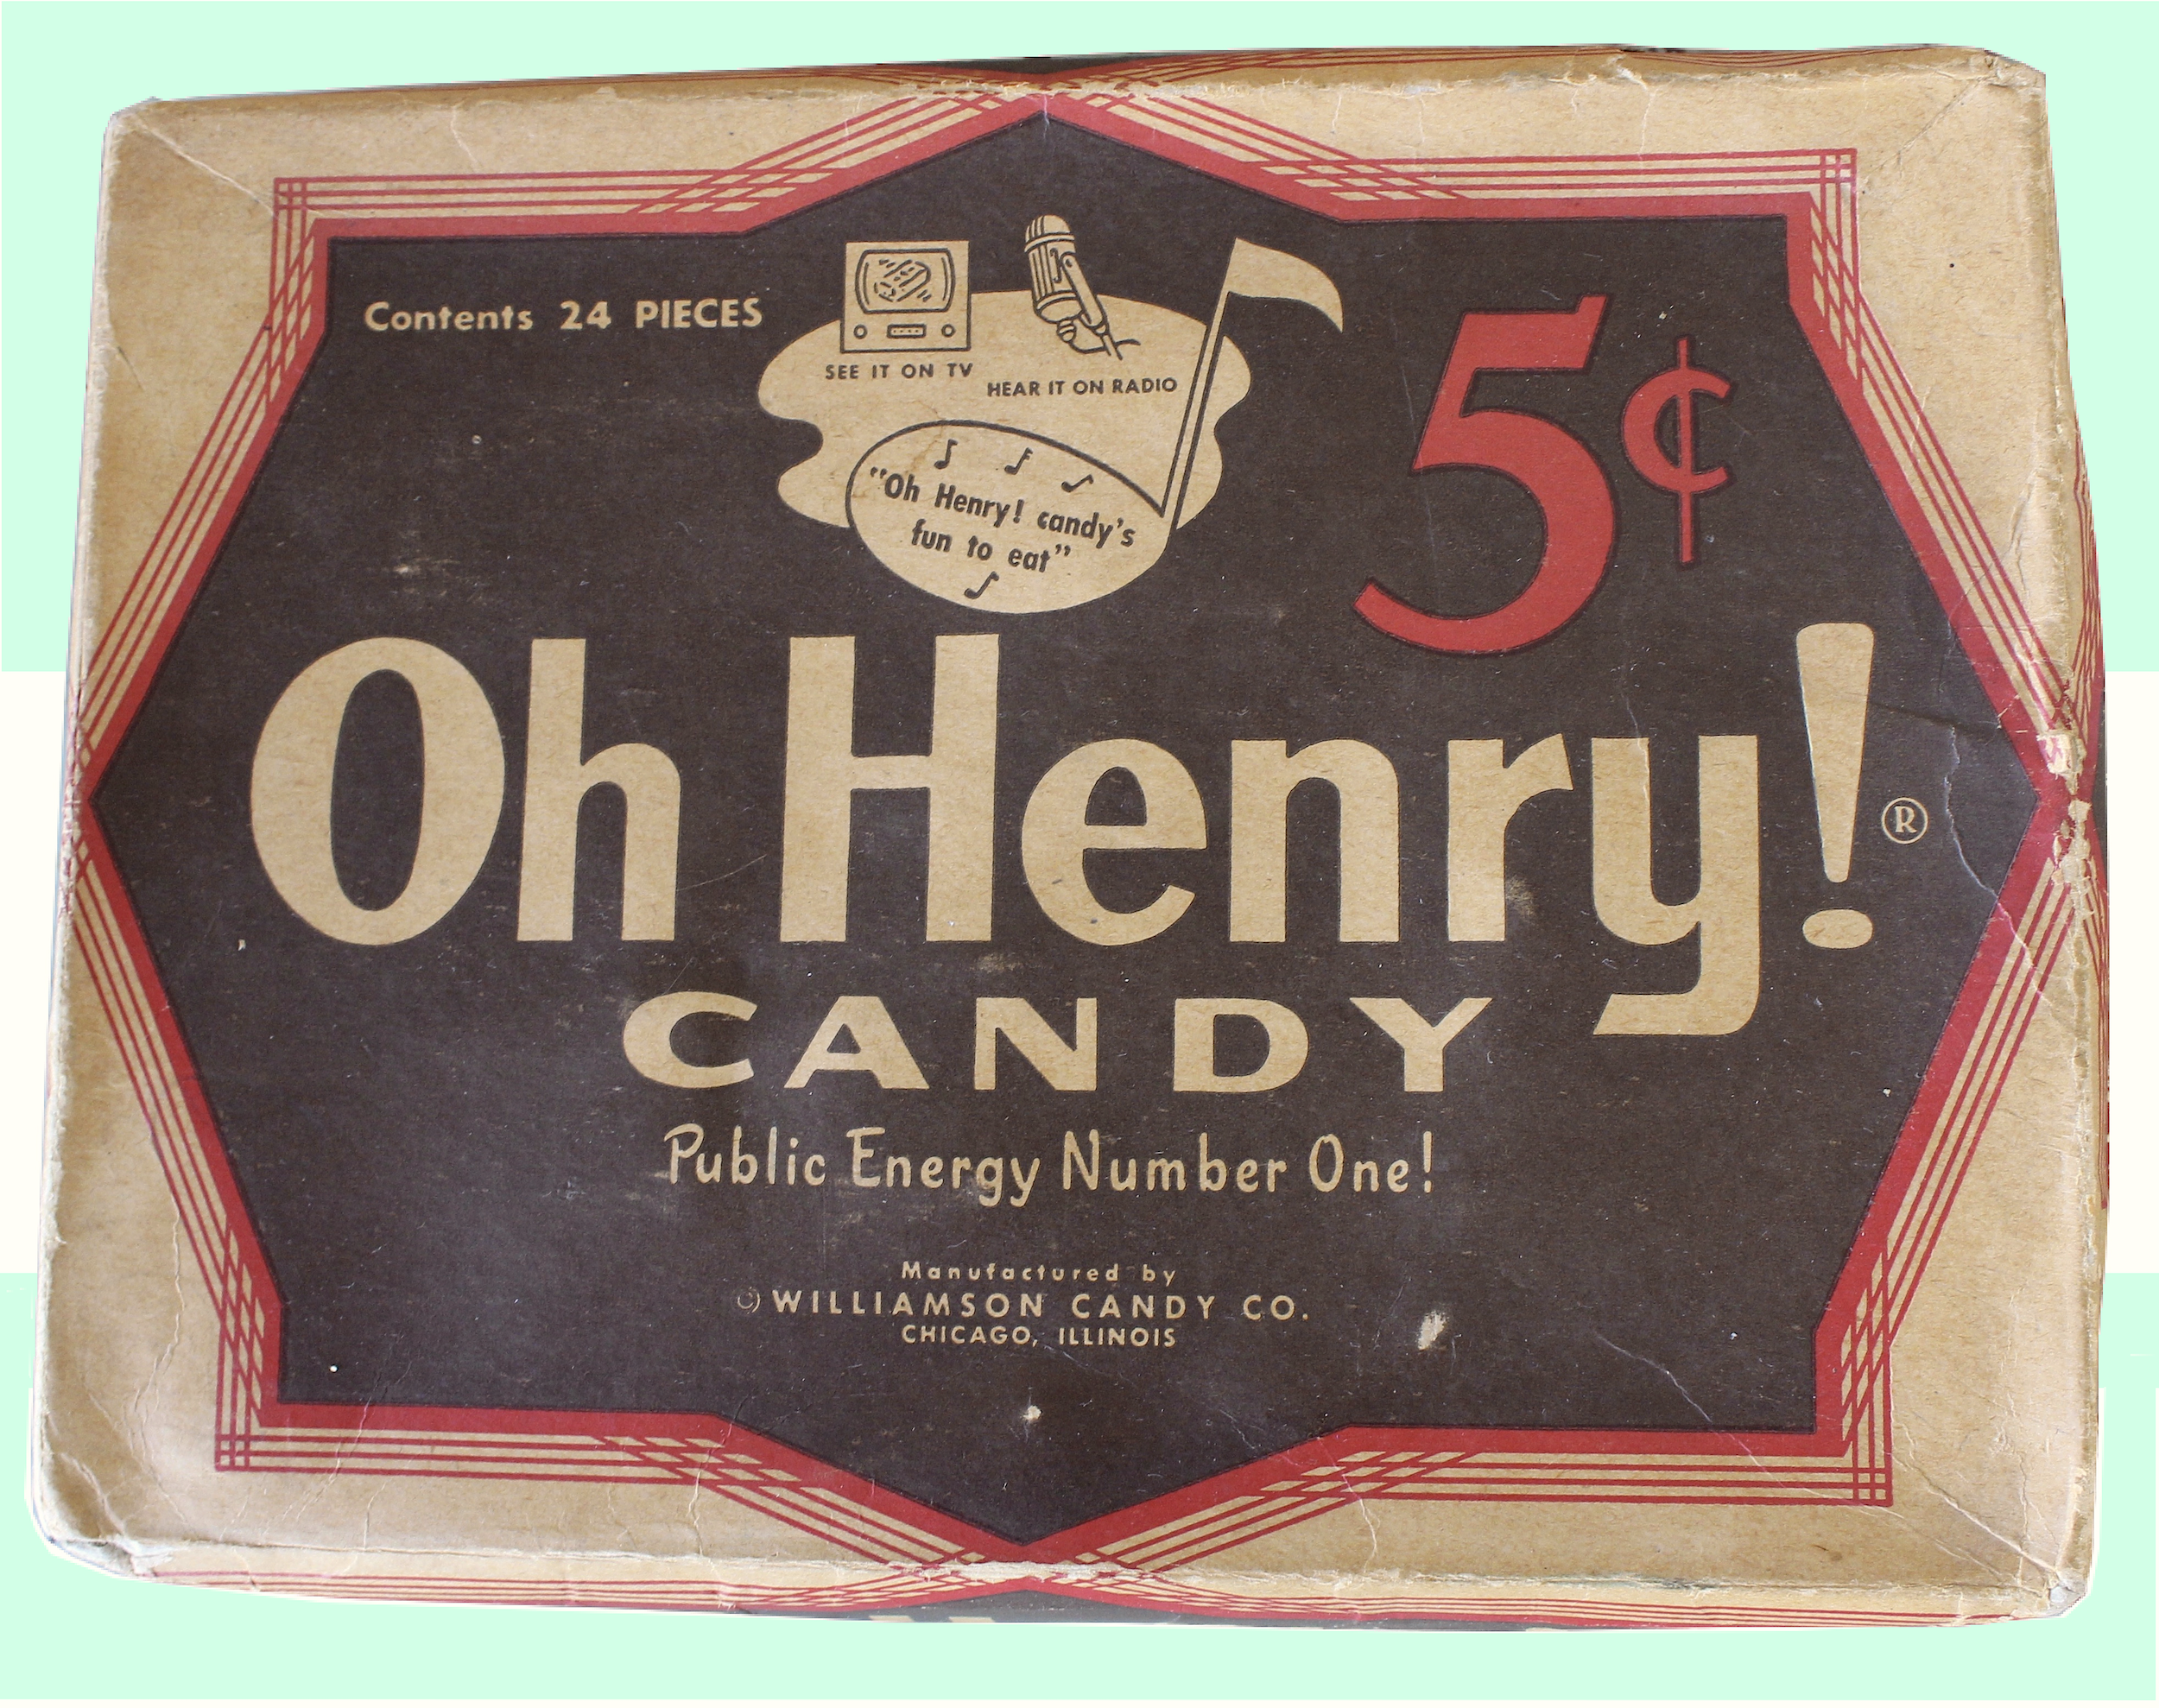 Oh Henry candy box